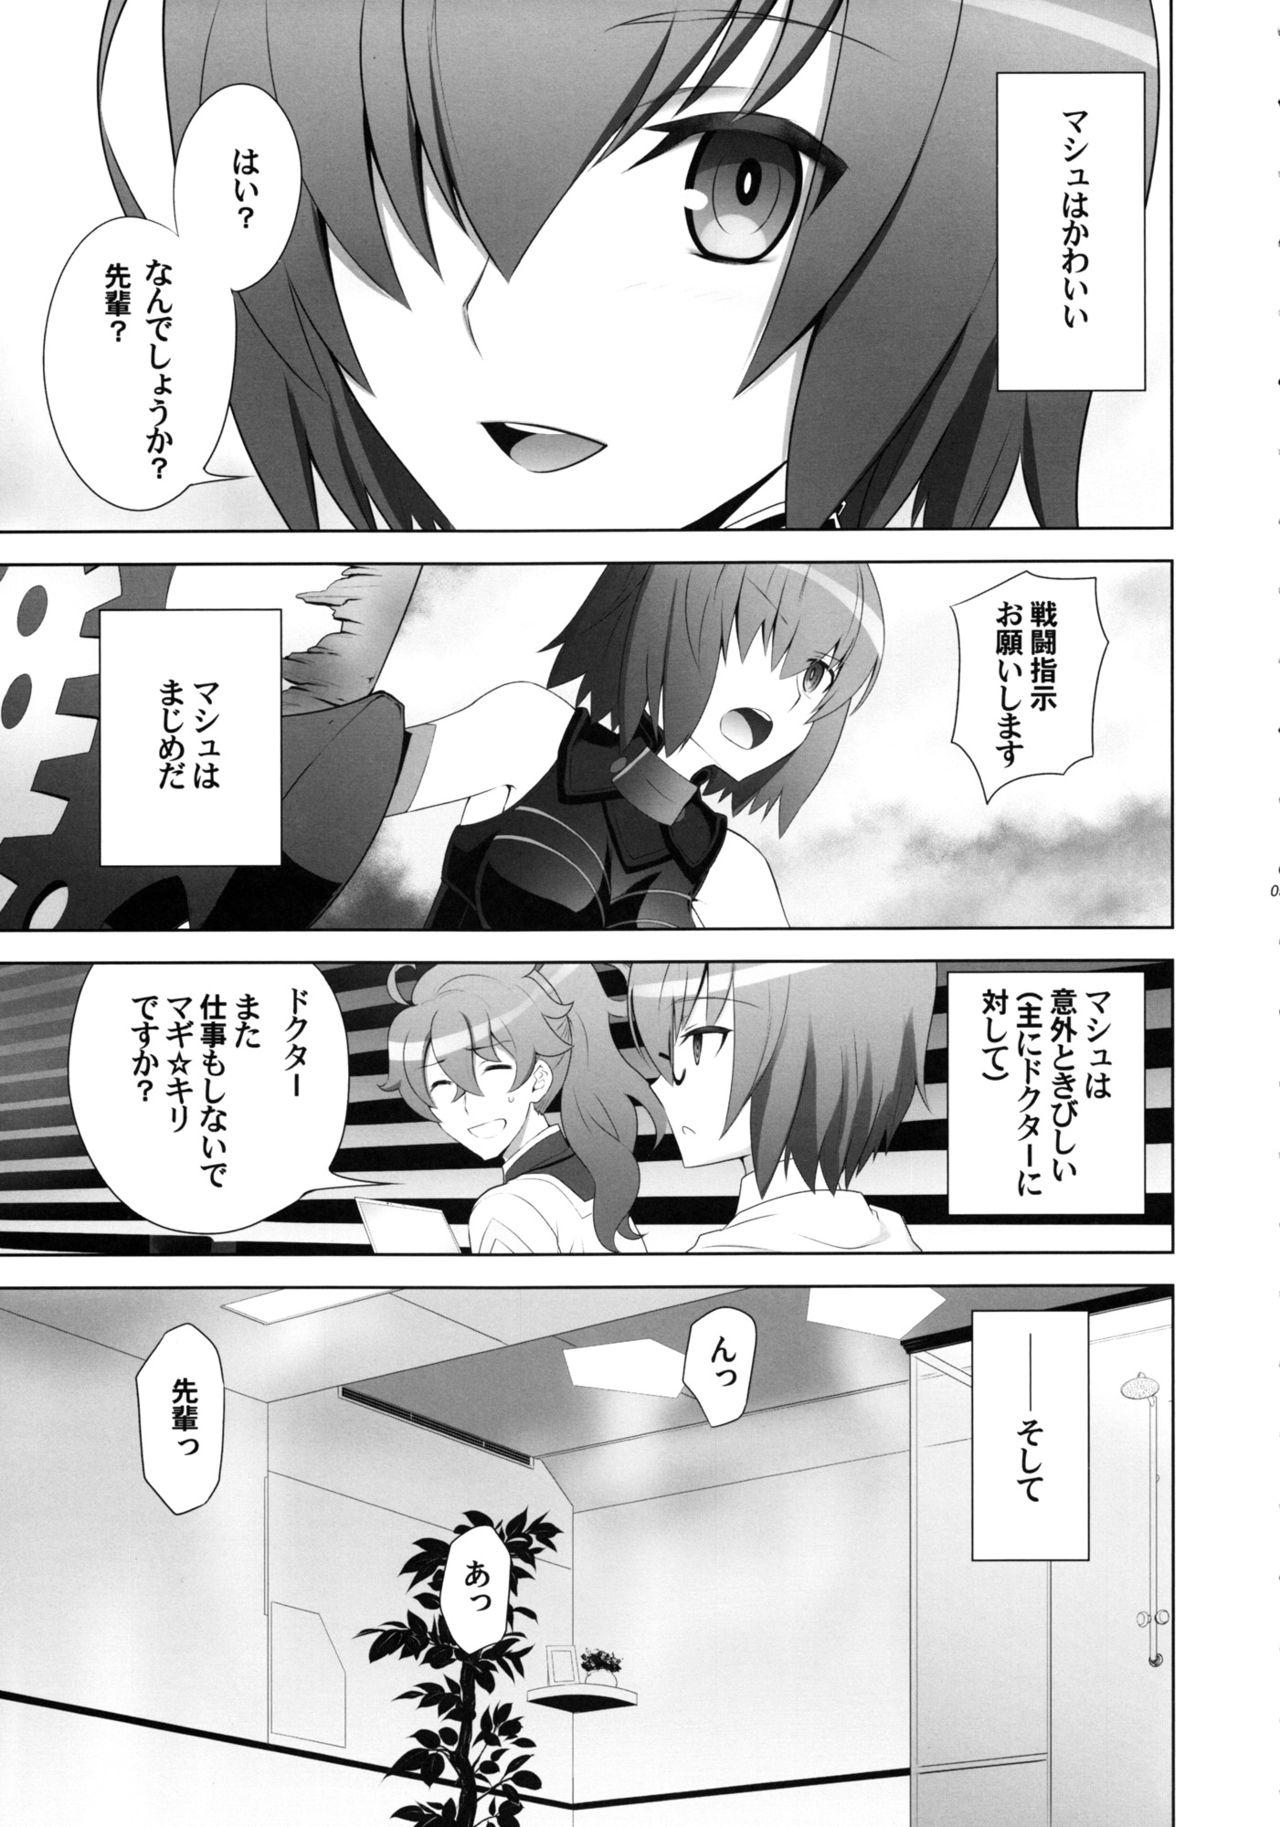 Gaypawn T*MOON COMPLEX GO 06 - Fate grand order Denmark - Page 4